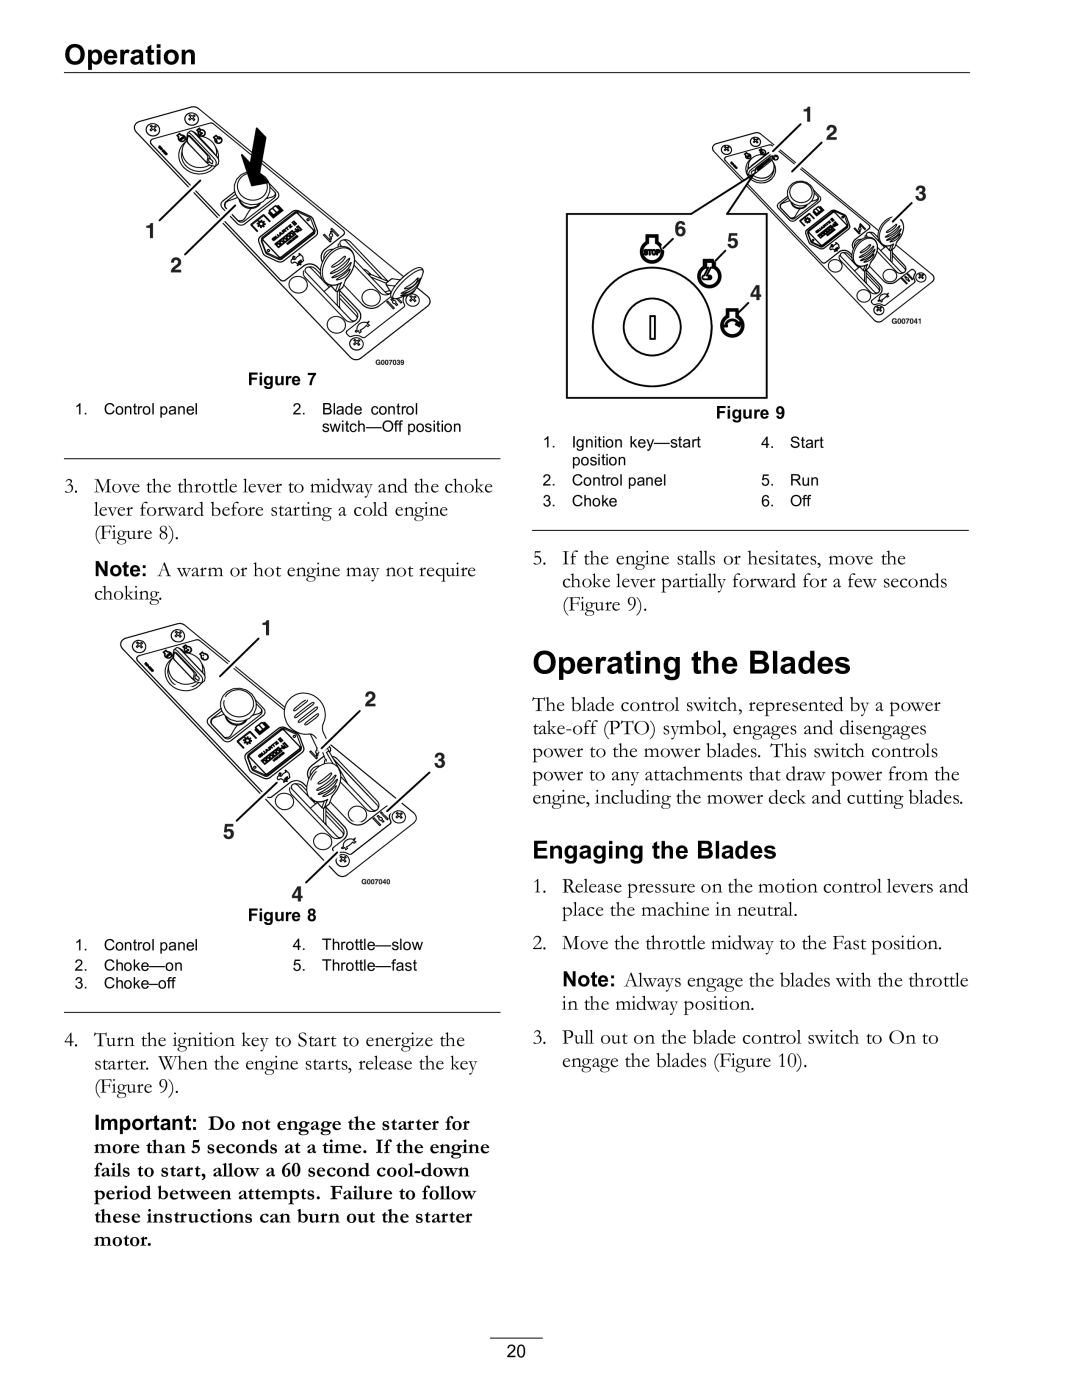 Exmark Lawn Mower manual Operating the Blades, Engaging the Blades 